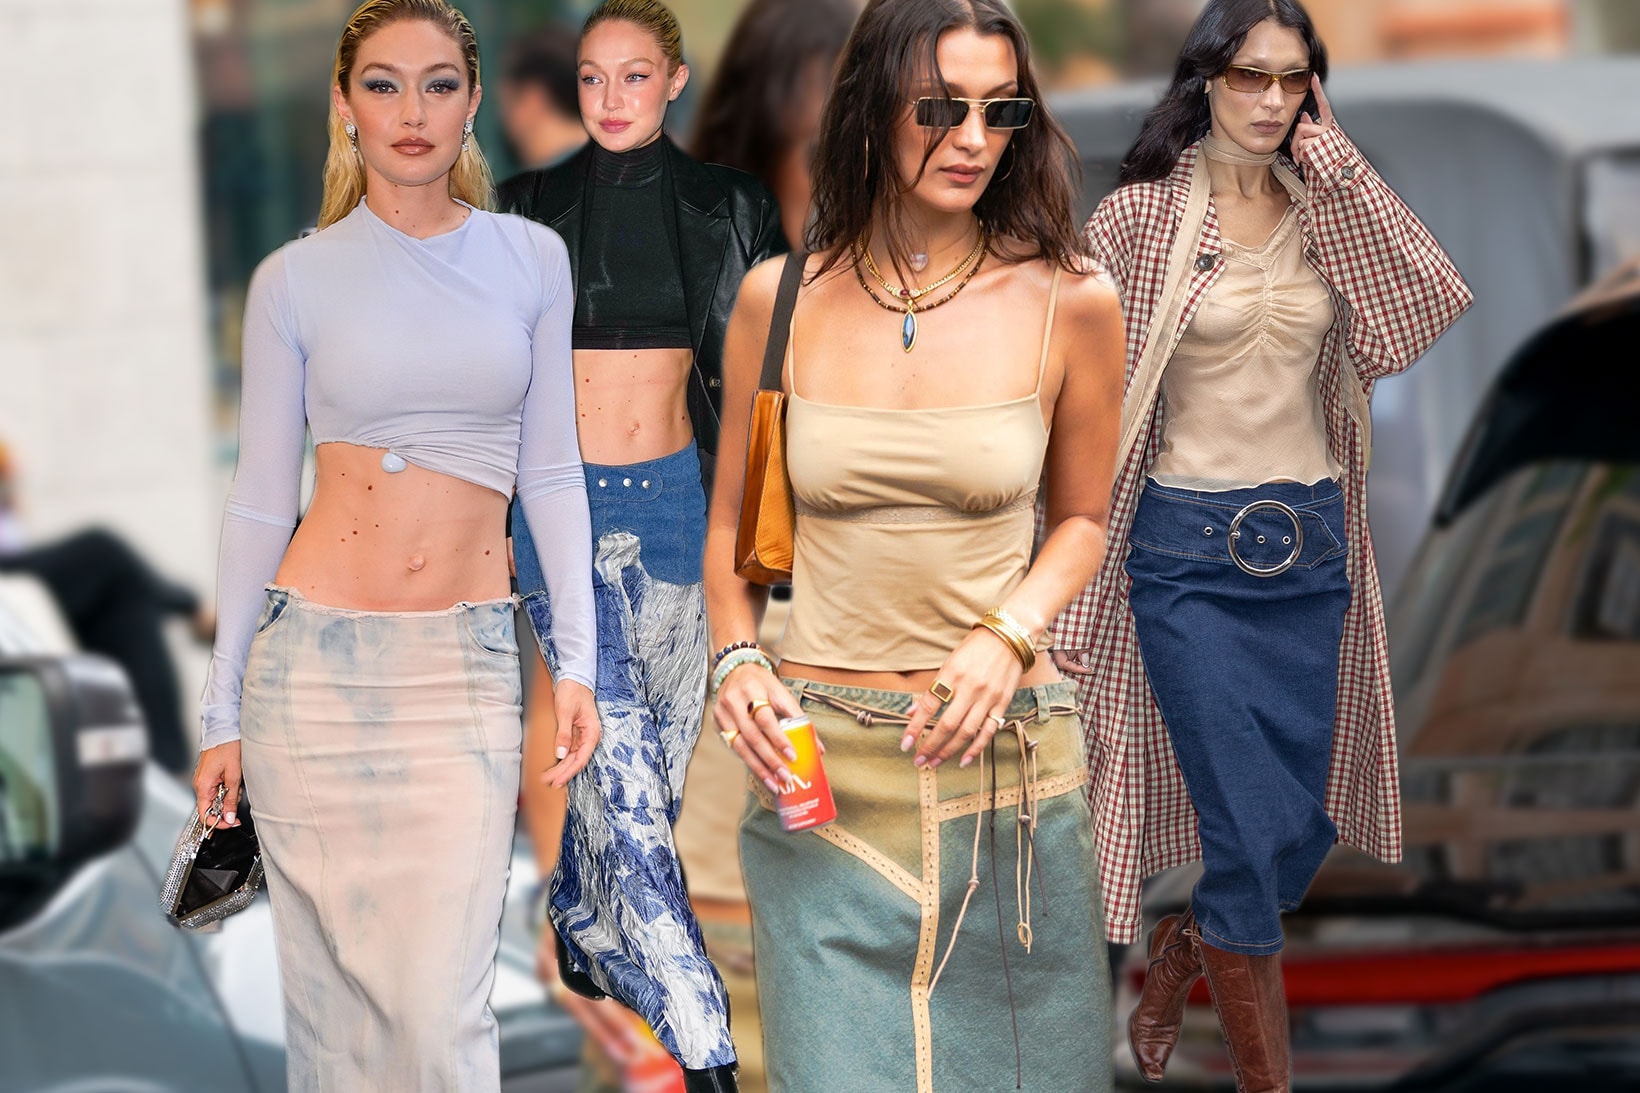 Kendall Jenner is a 2000s mall babe in a denim mini skirt